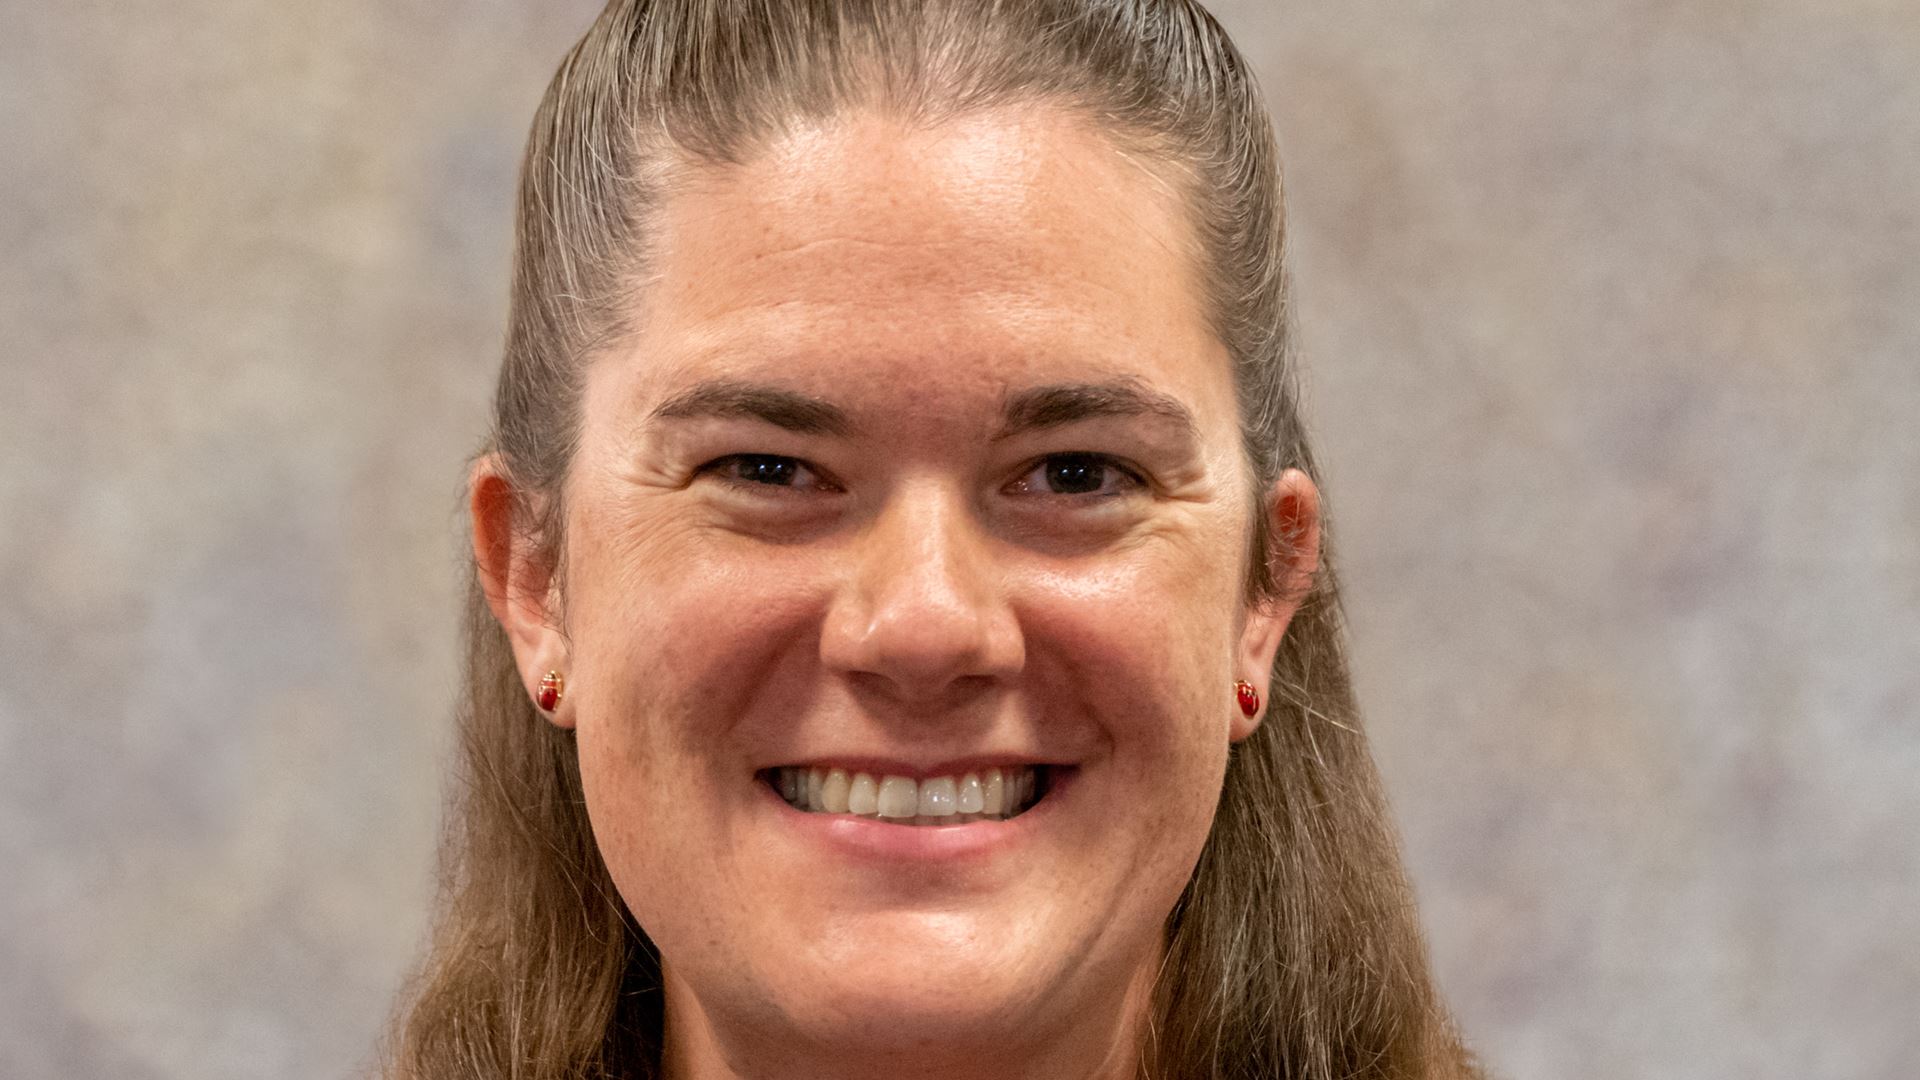 Faculty Focus: Catherine Brewer, College of Engineering